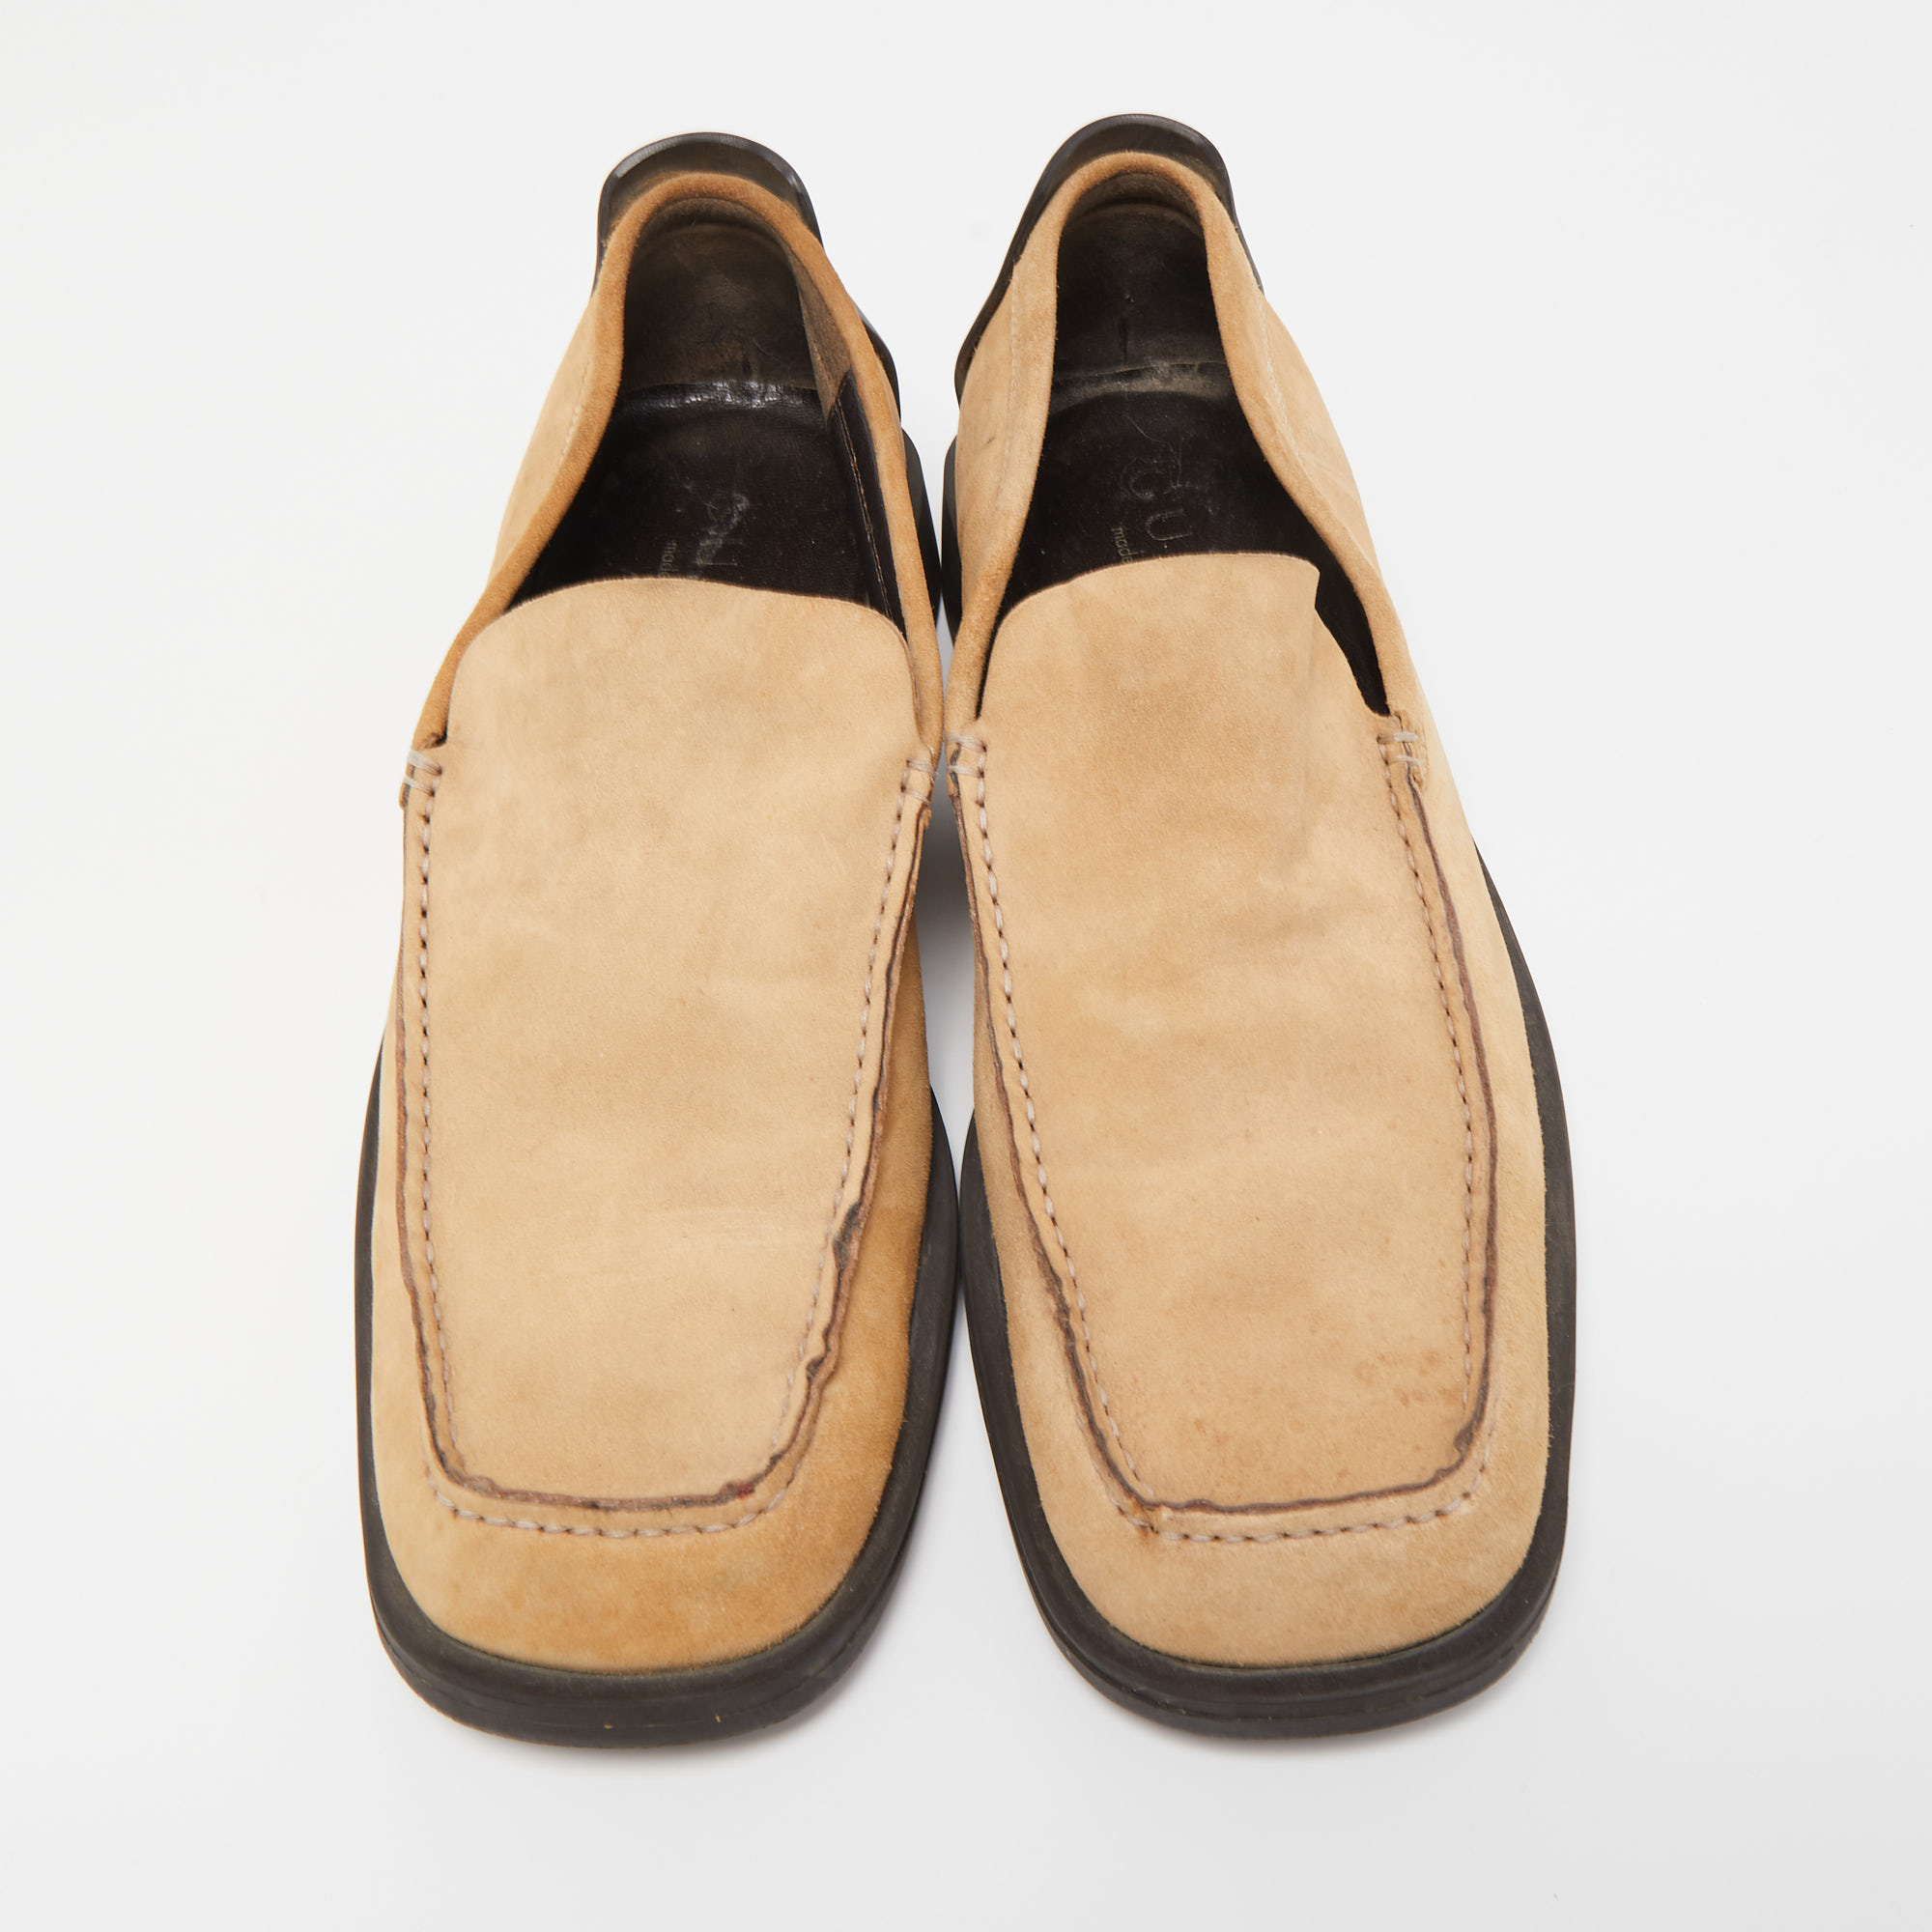 Gucci Beige Suede Slip On Loafers Size 43.5